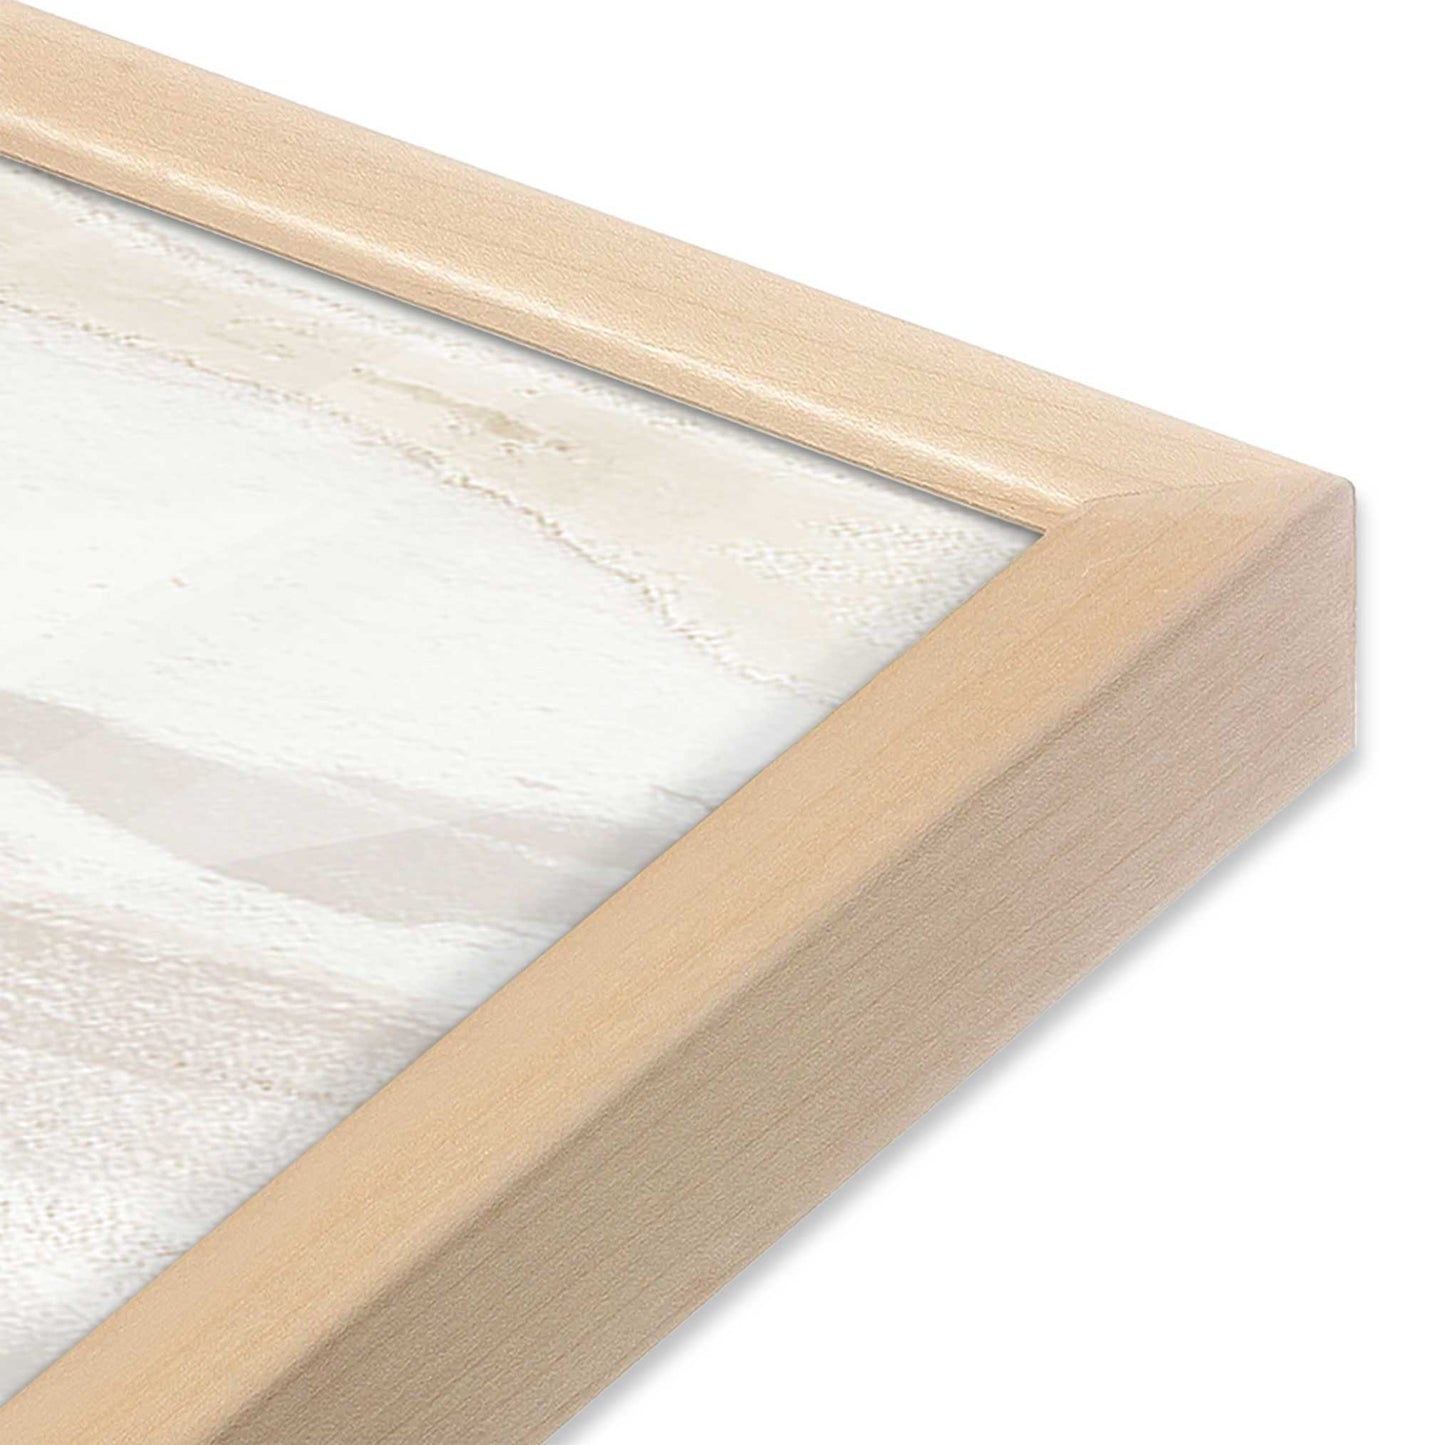 [Color:Raw Maple], Picture of art in a Raw Maple frame of the corner #2